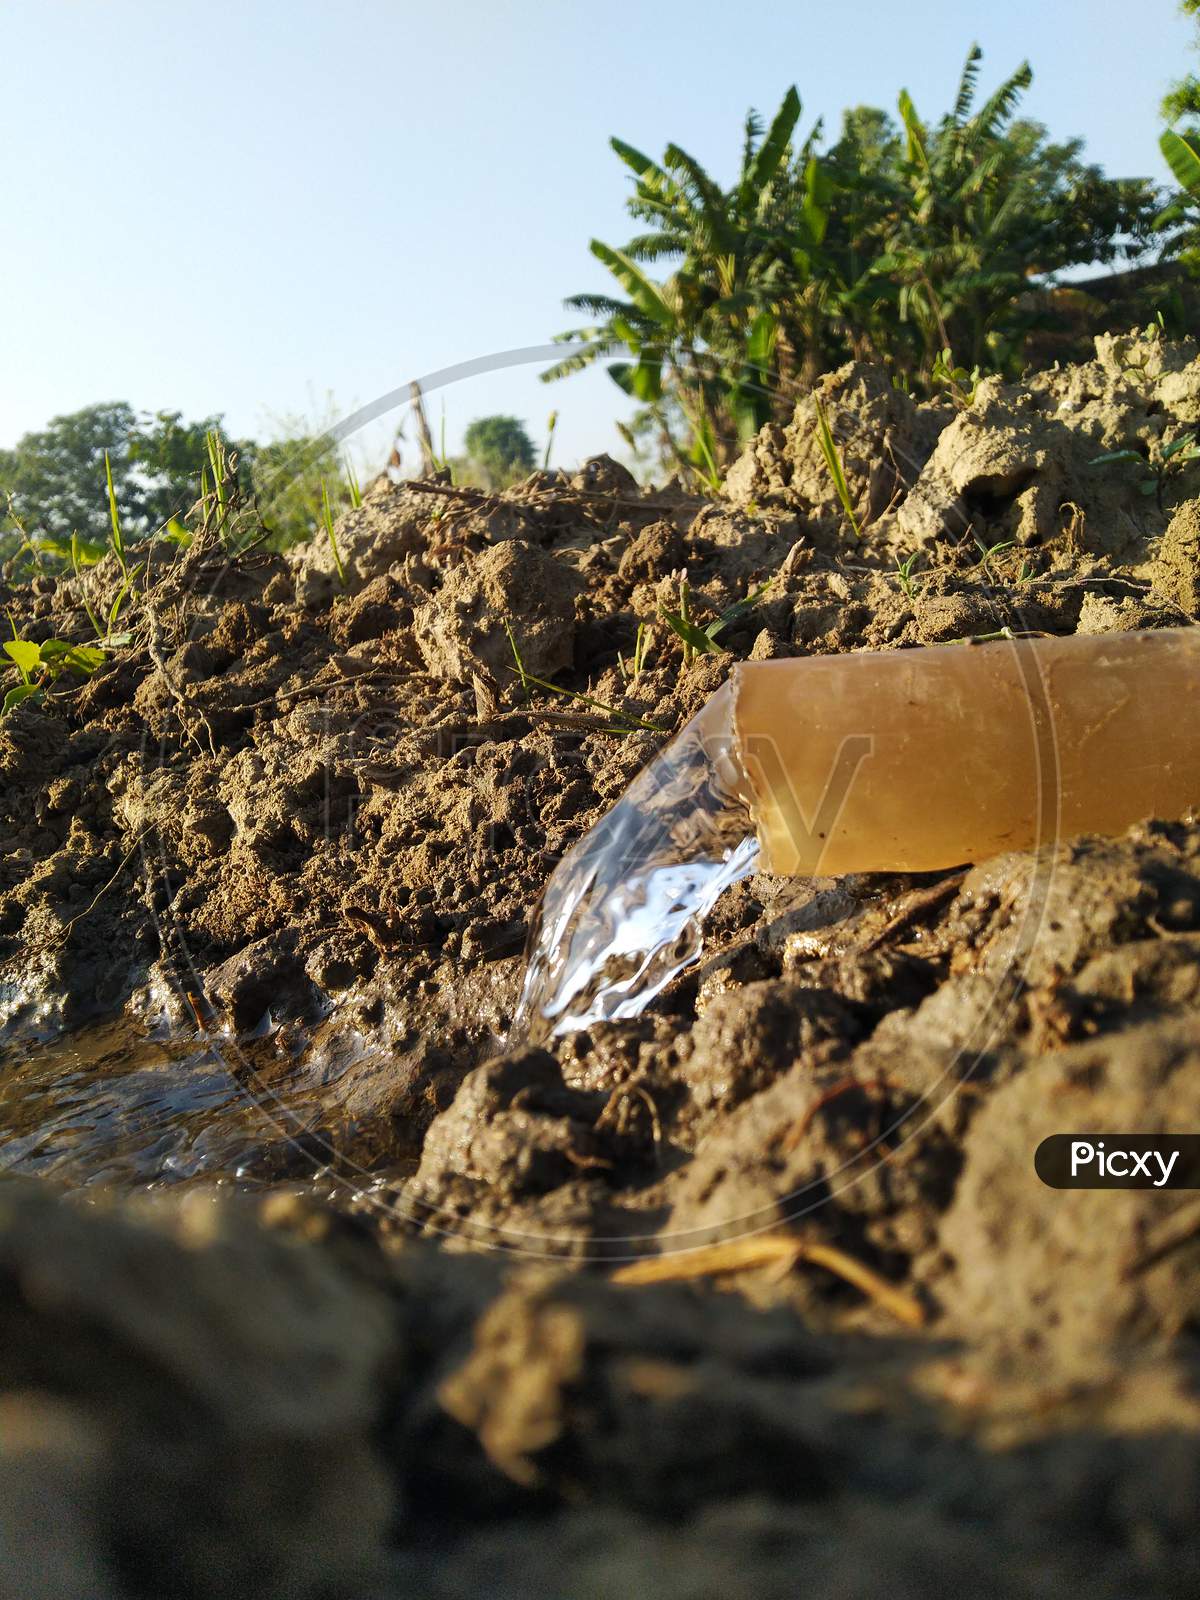 Water is coming through a plastic pipe in agriculture land